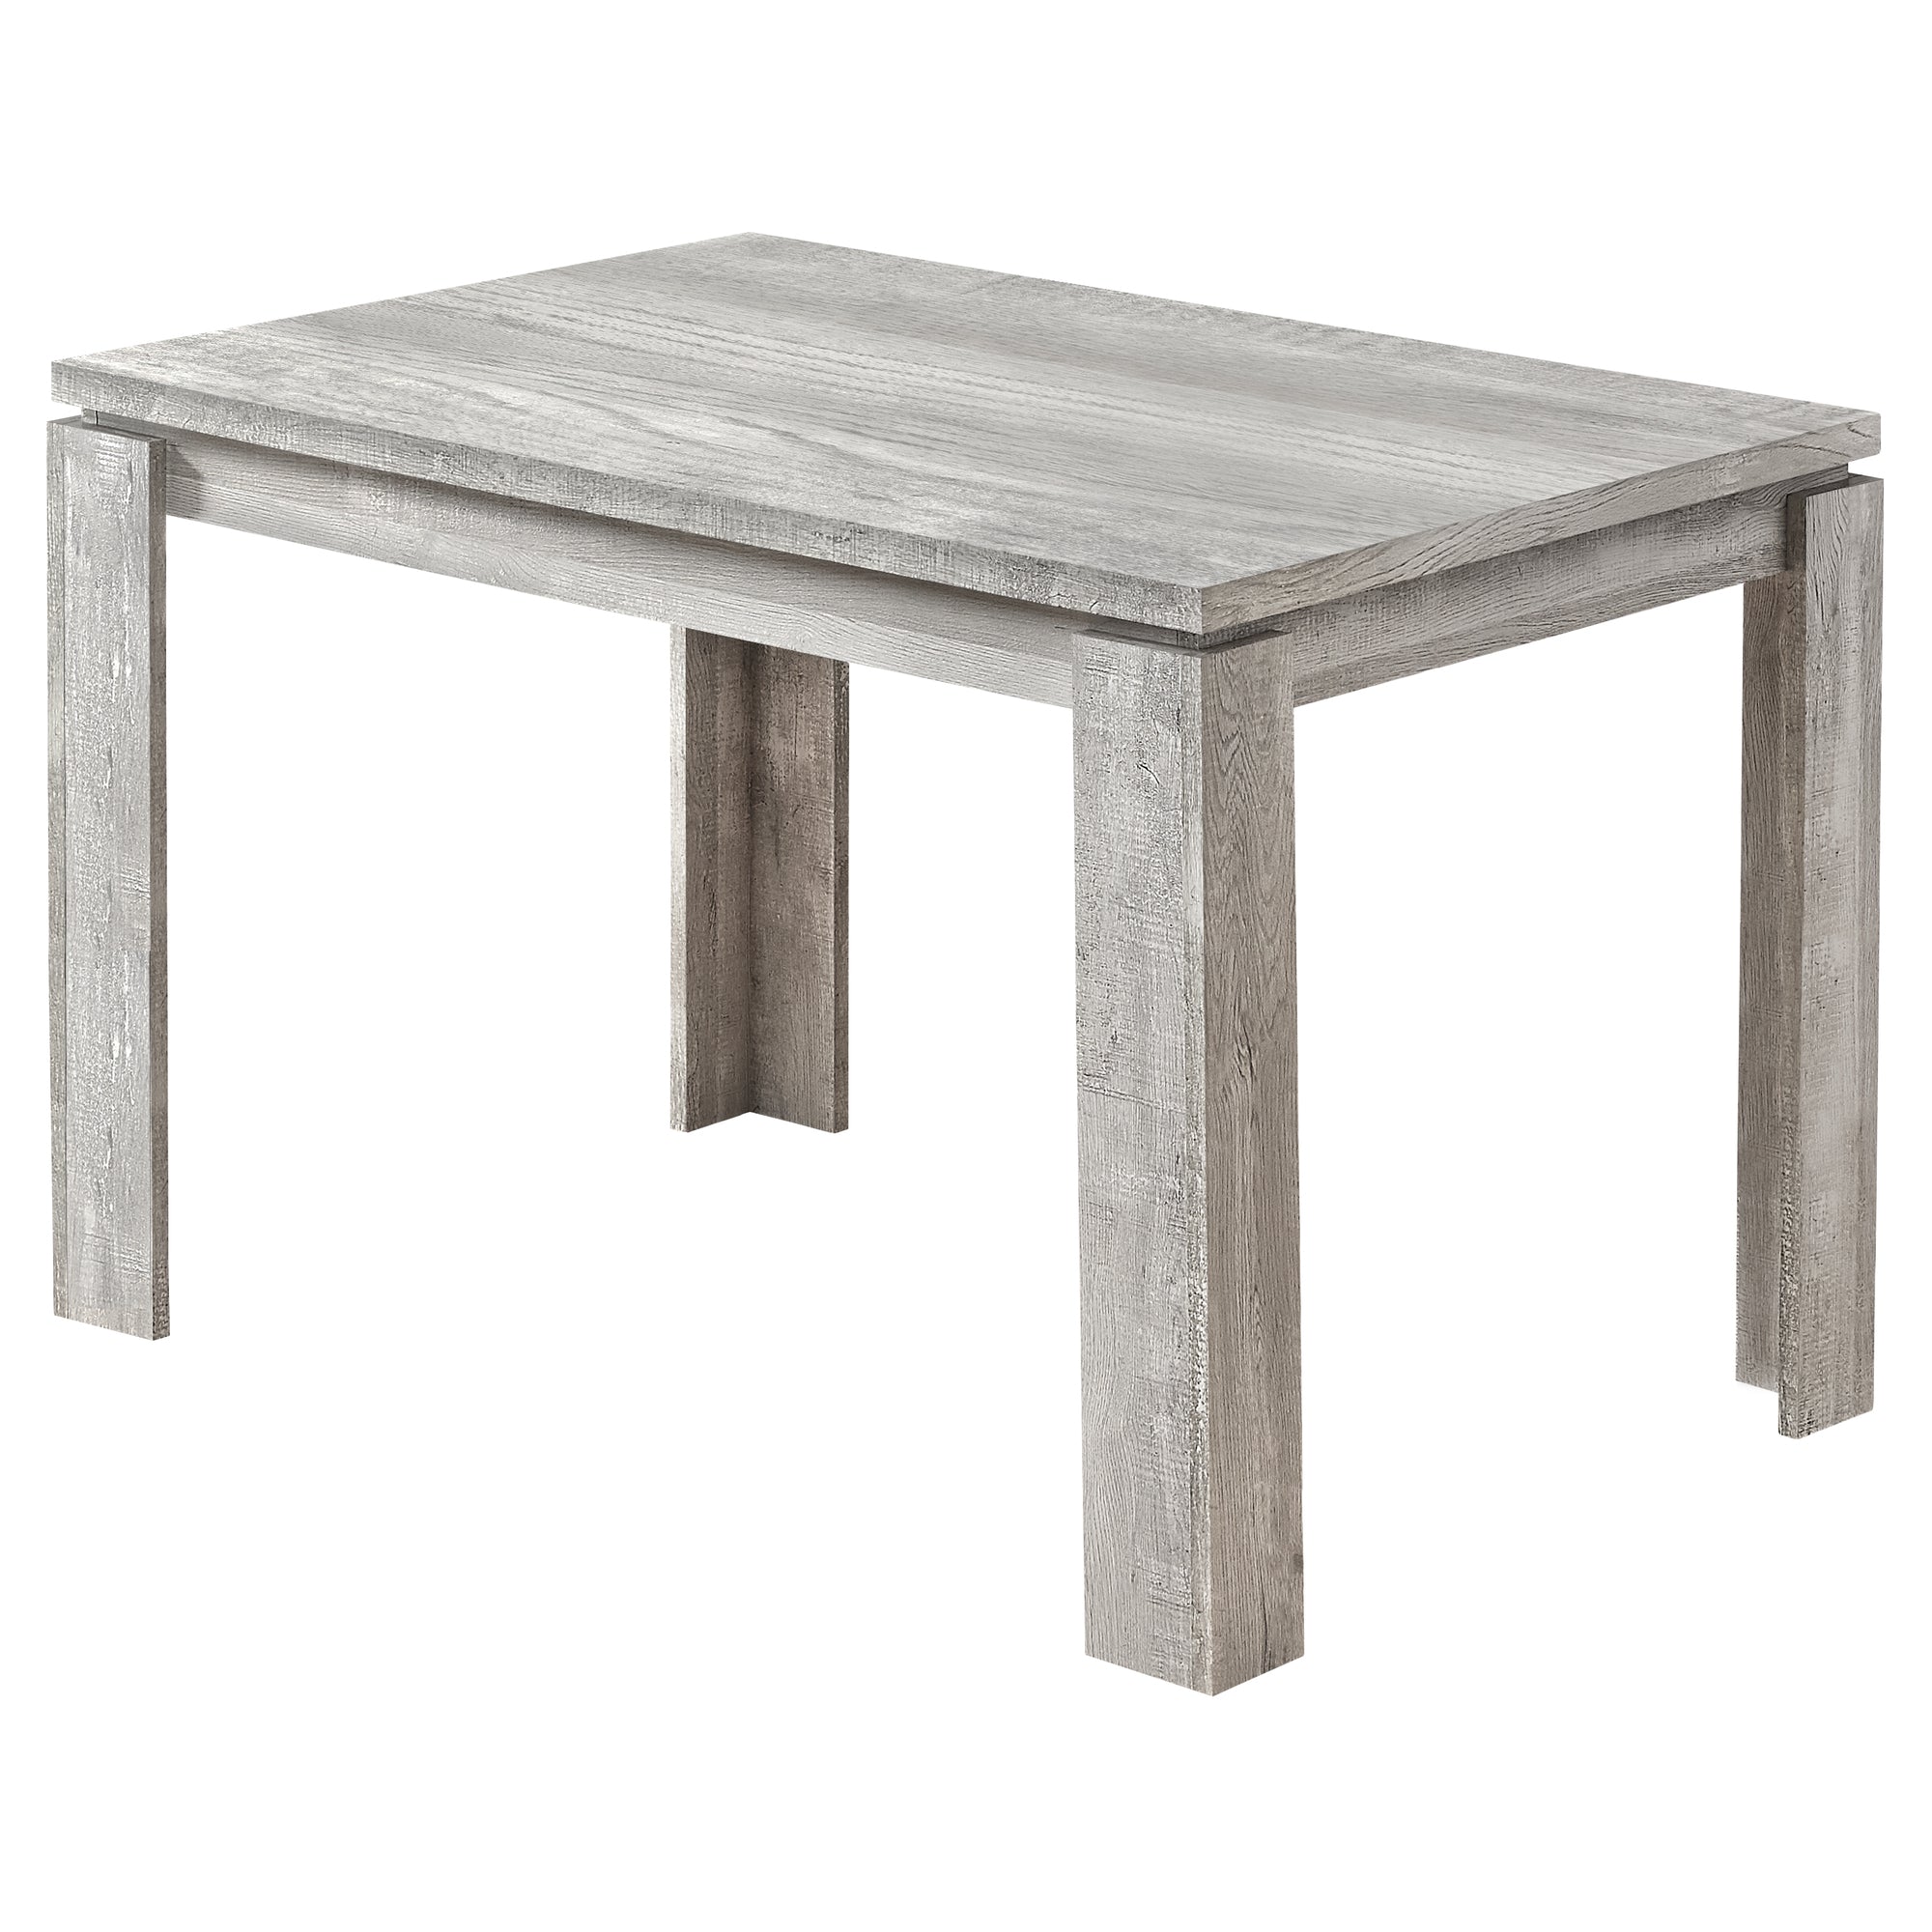 Dining Table - 32X 48 / Grey Reclaimed Wood-Look